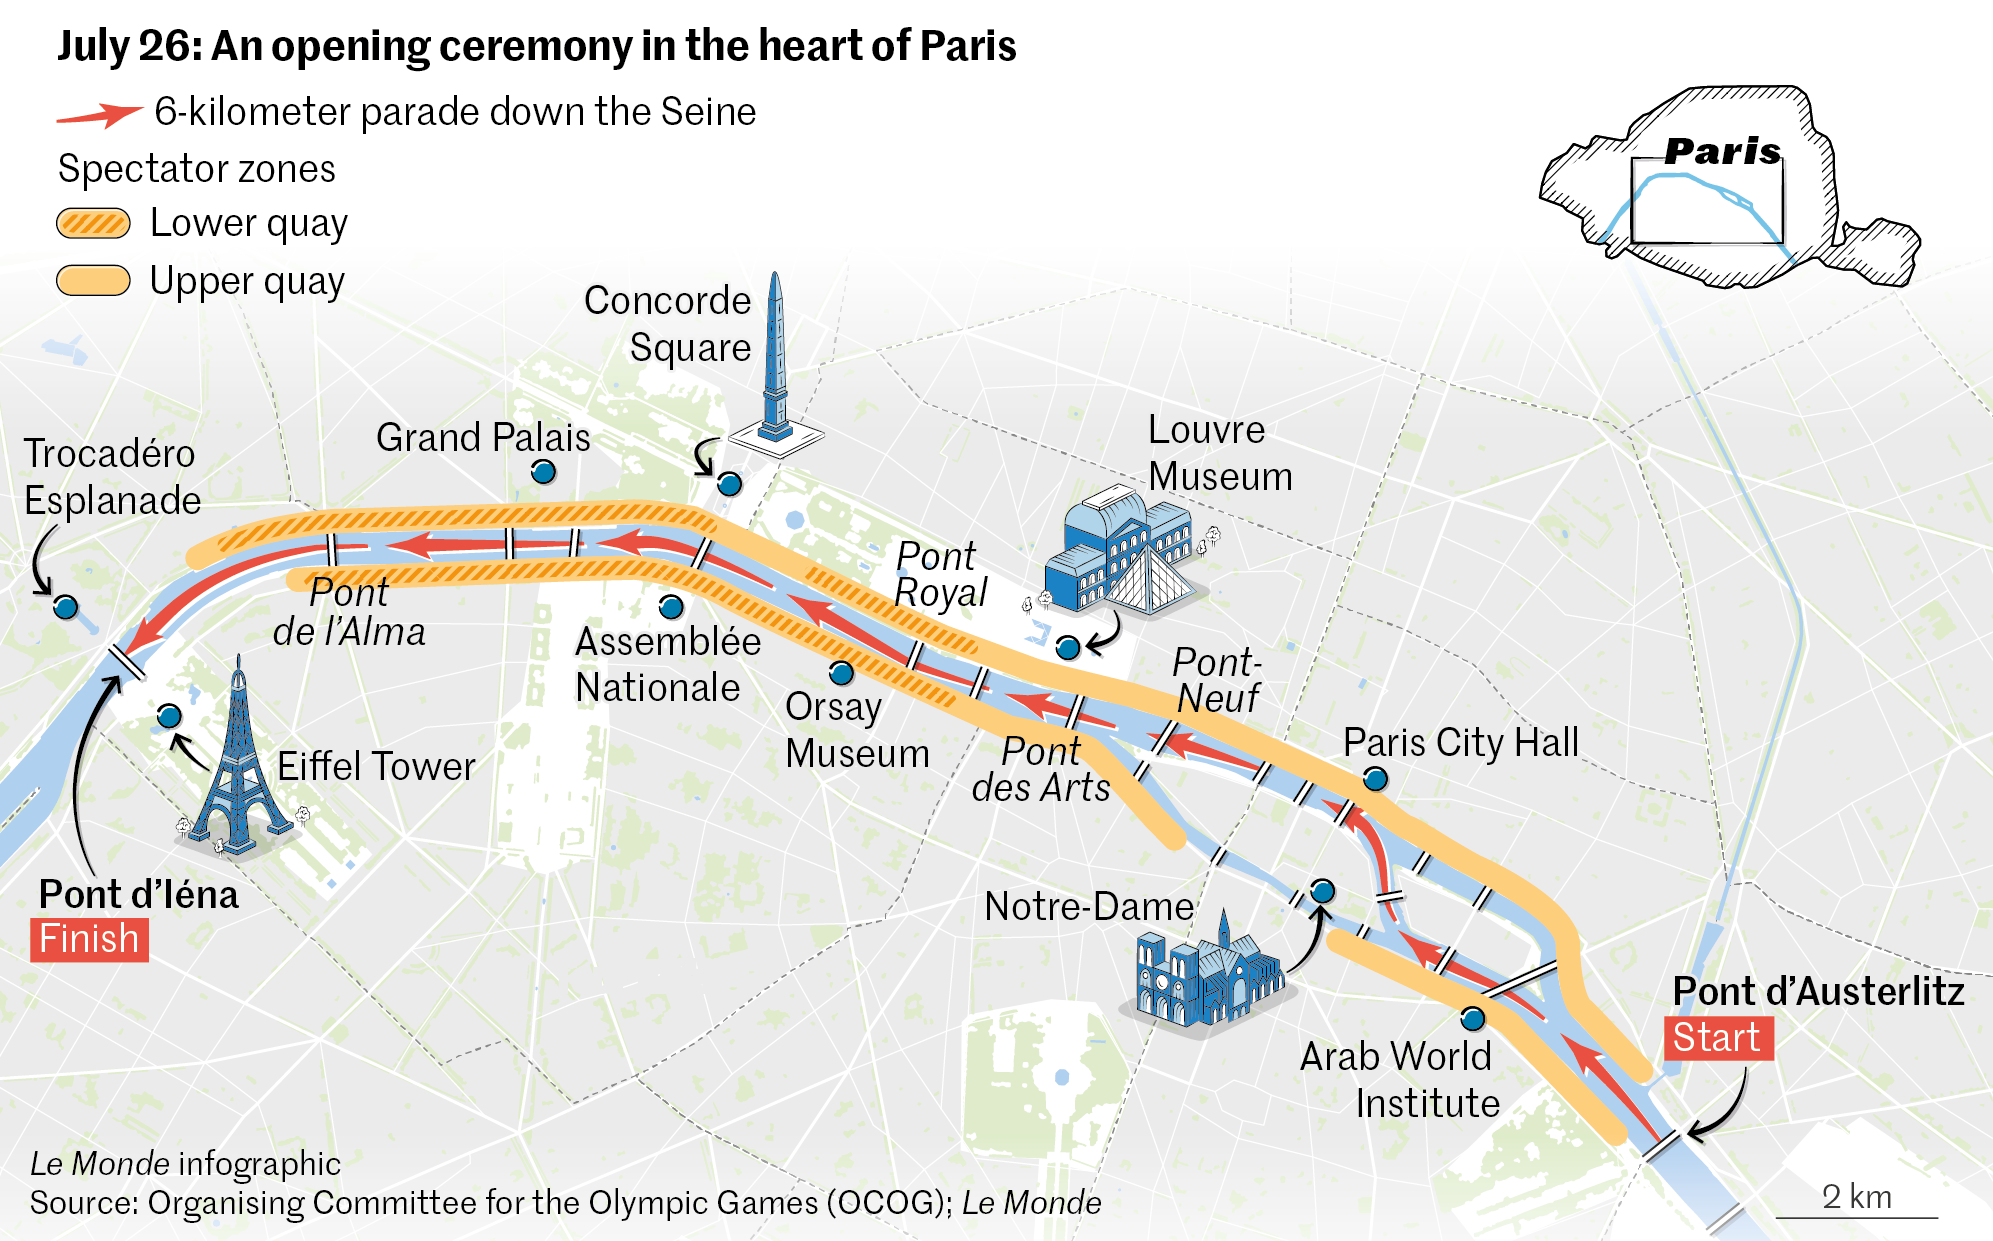 A map showing the route of the parade. LE MONDE